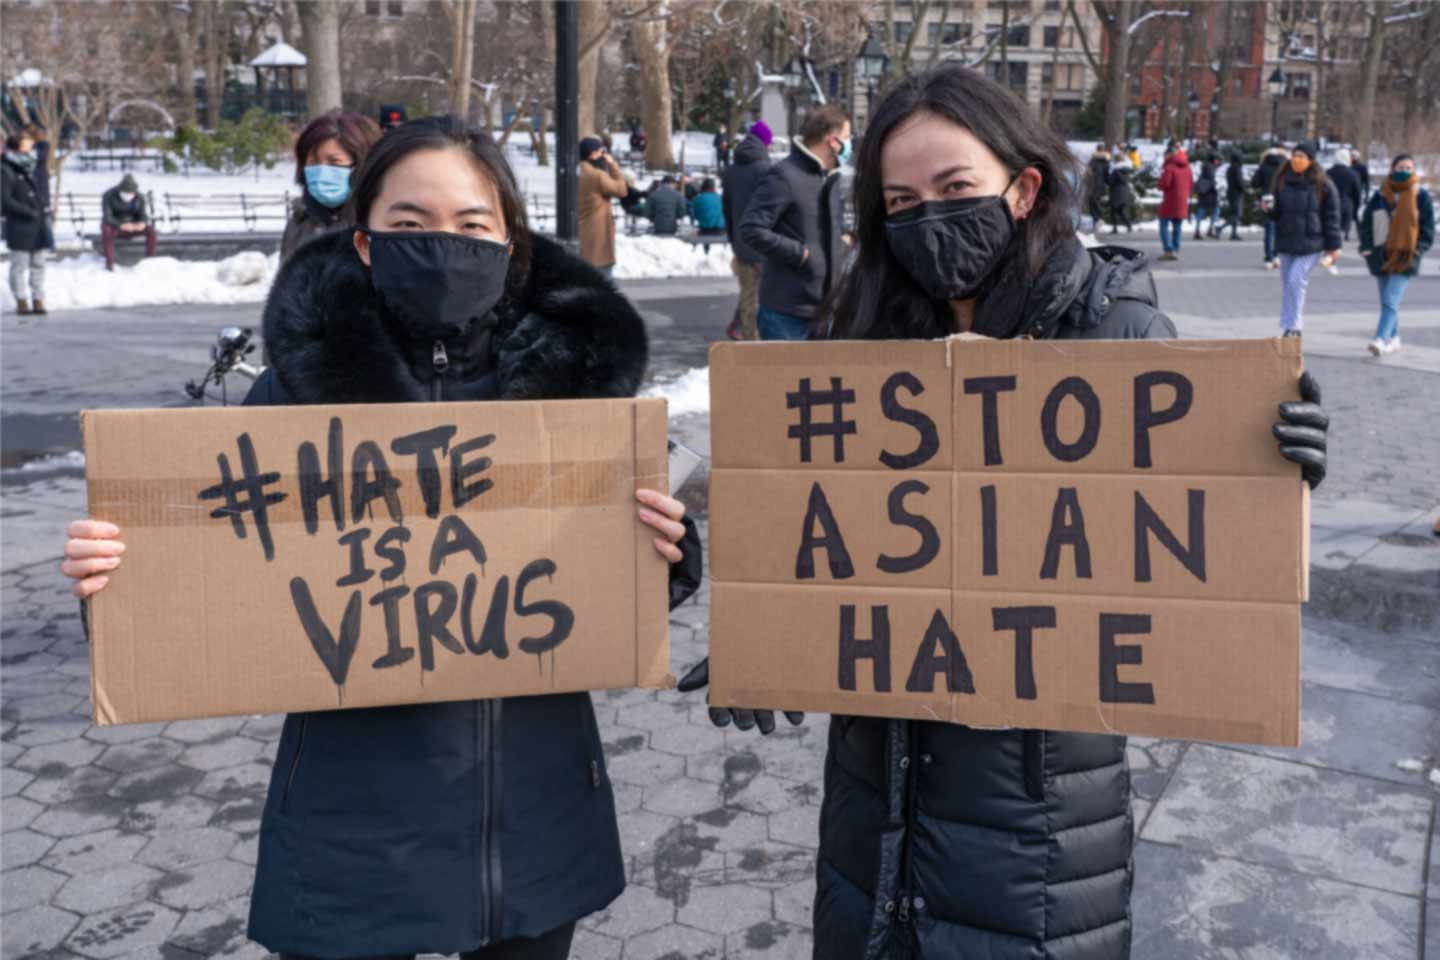 two protestors with signs bringing awareness to Asian hate